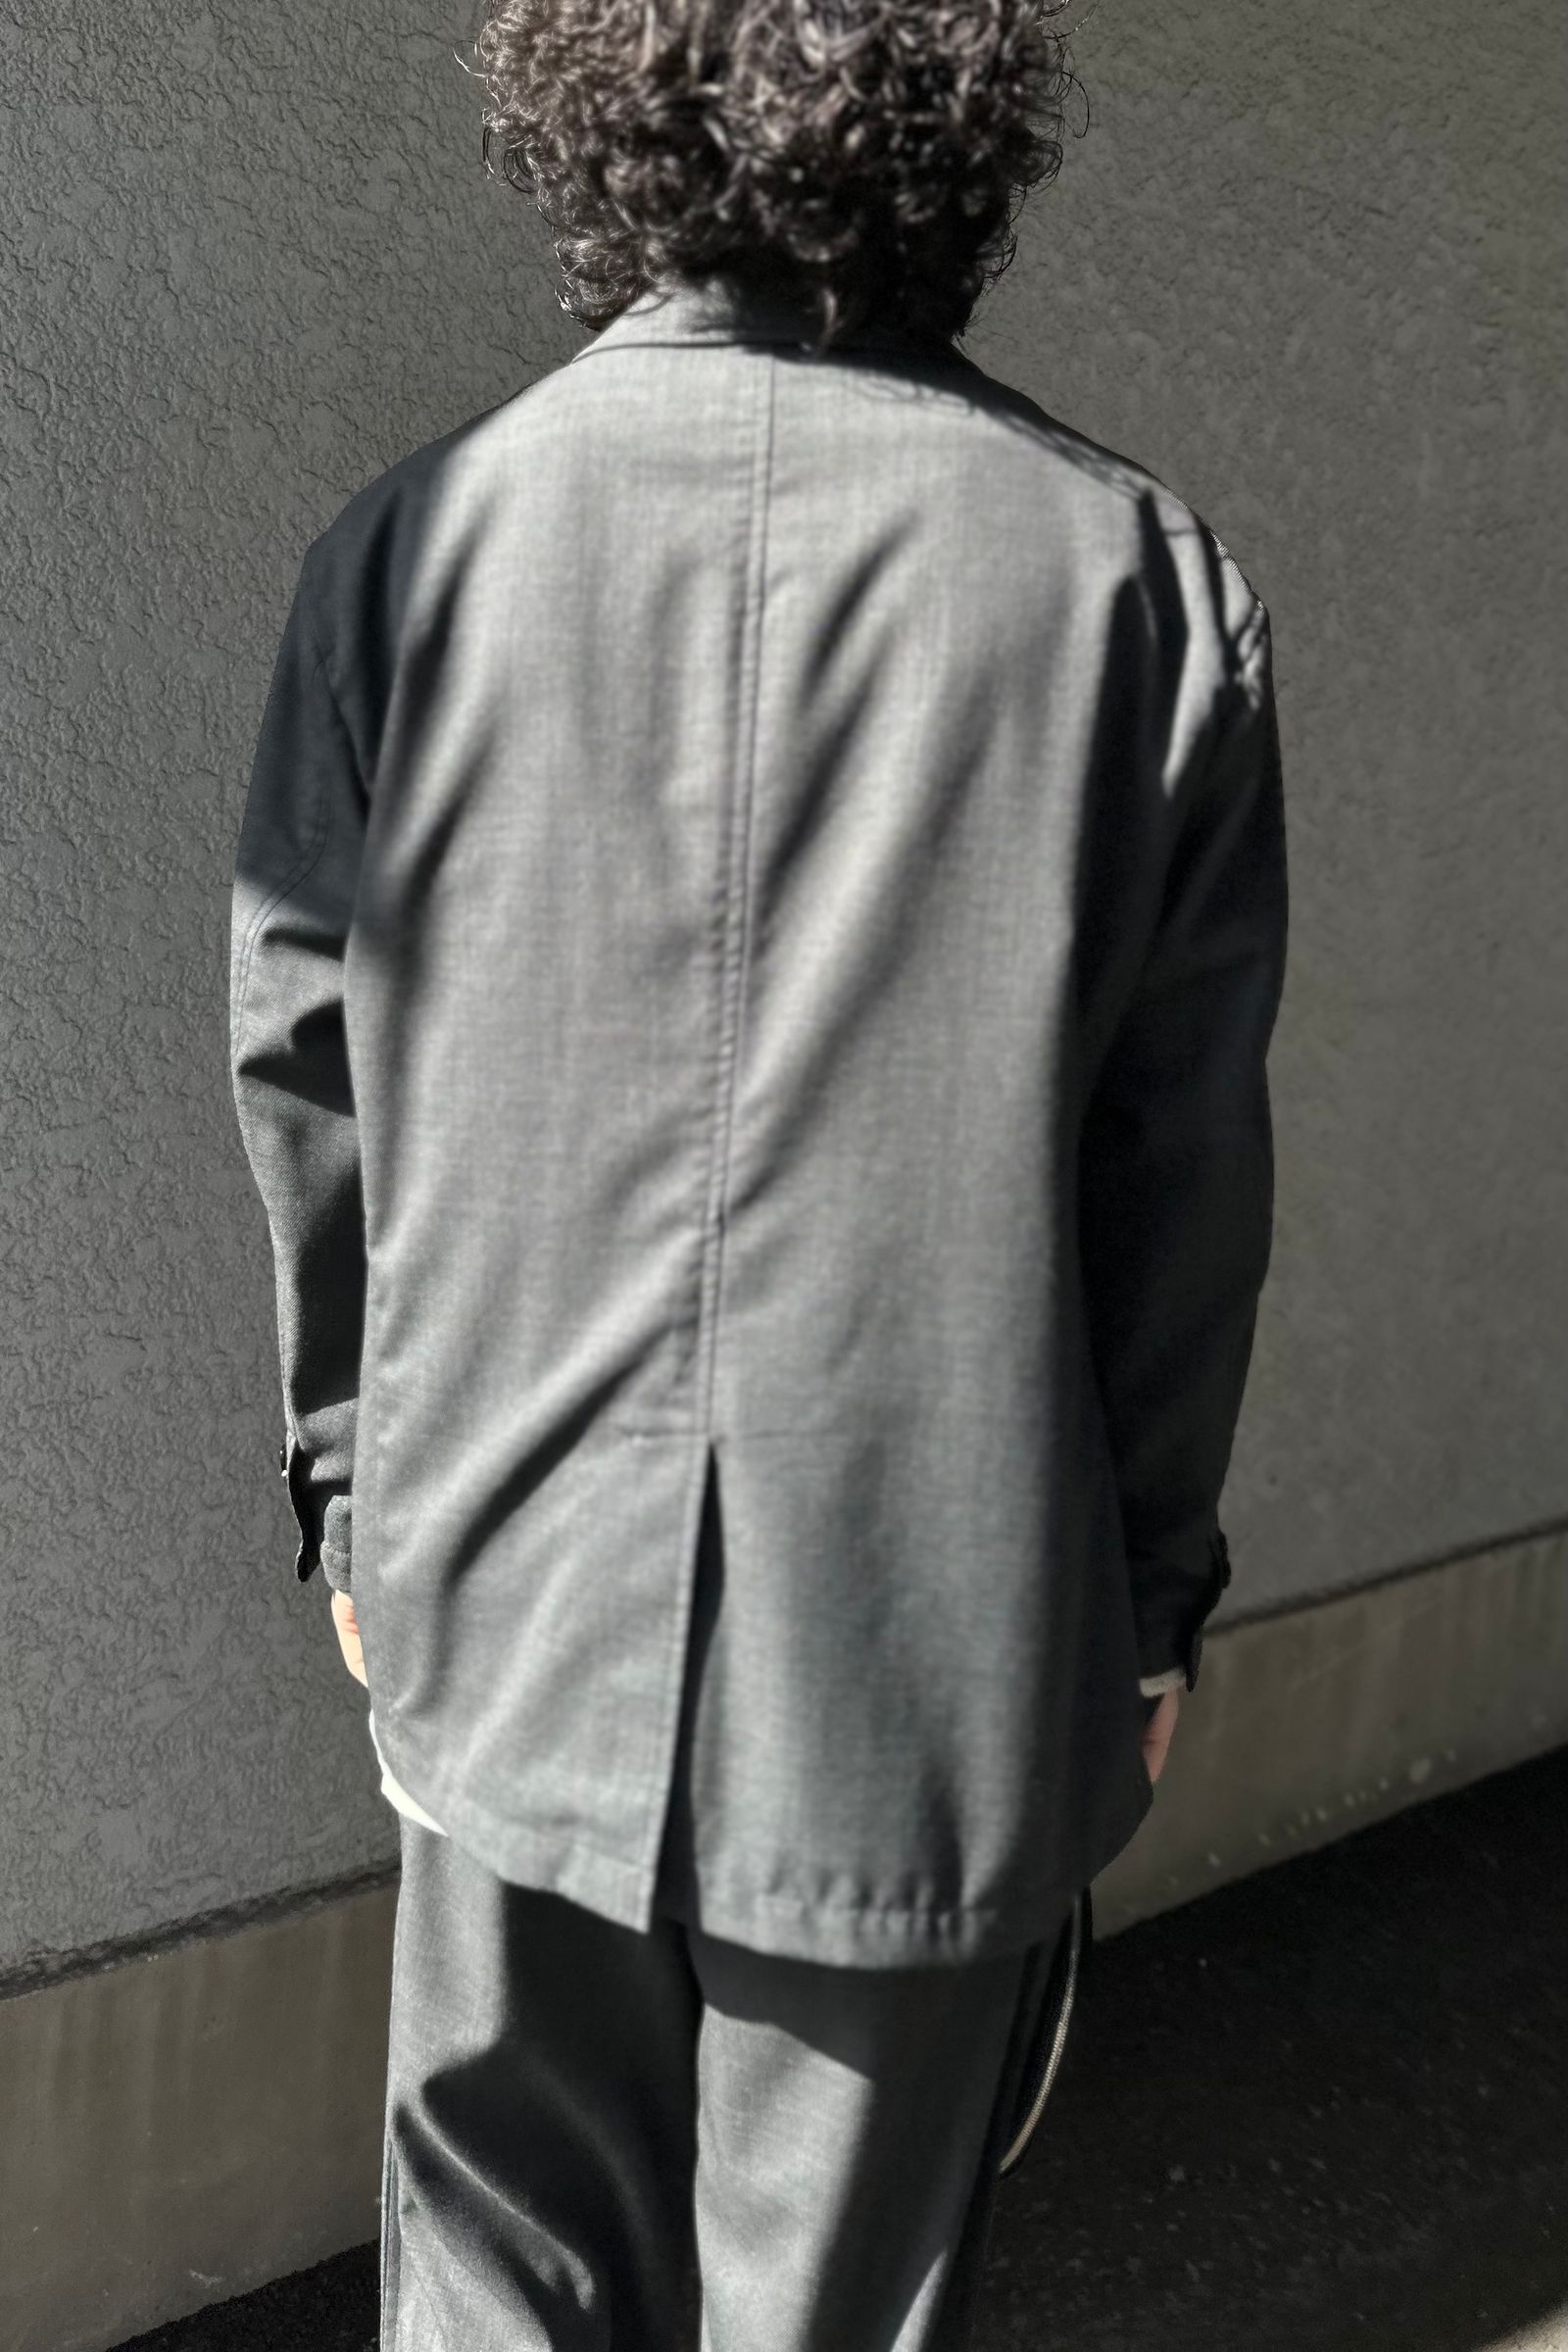 WEWILL - SINGLE BREASTED 2B TAIL ORED JACKET-CHARCOAL GRAY- 24SS 